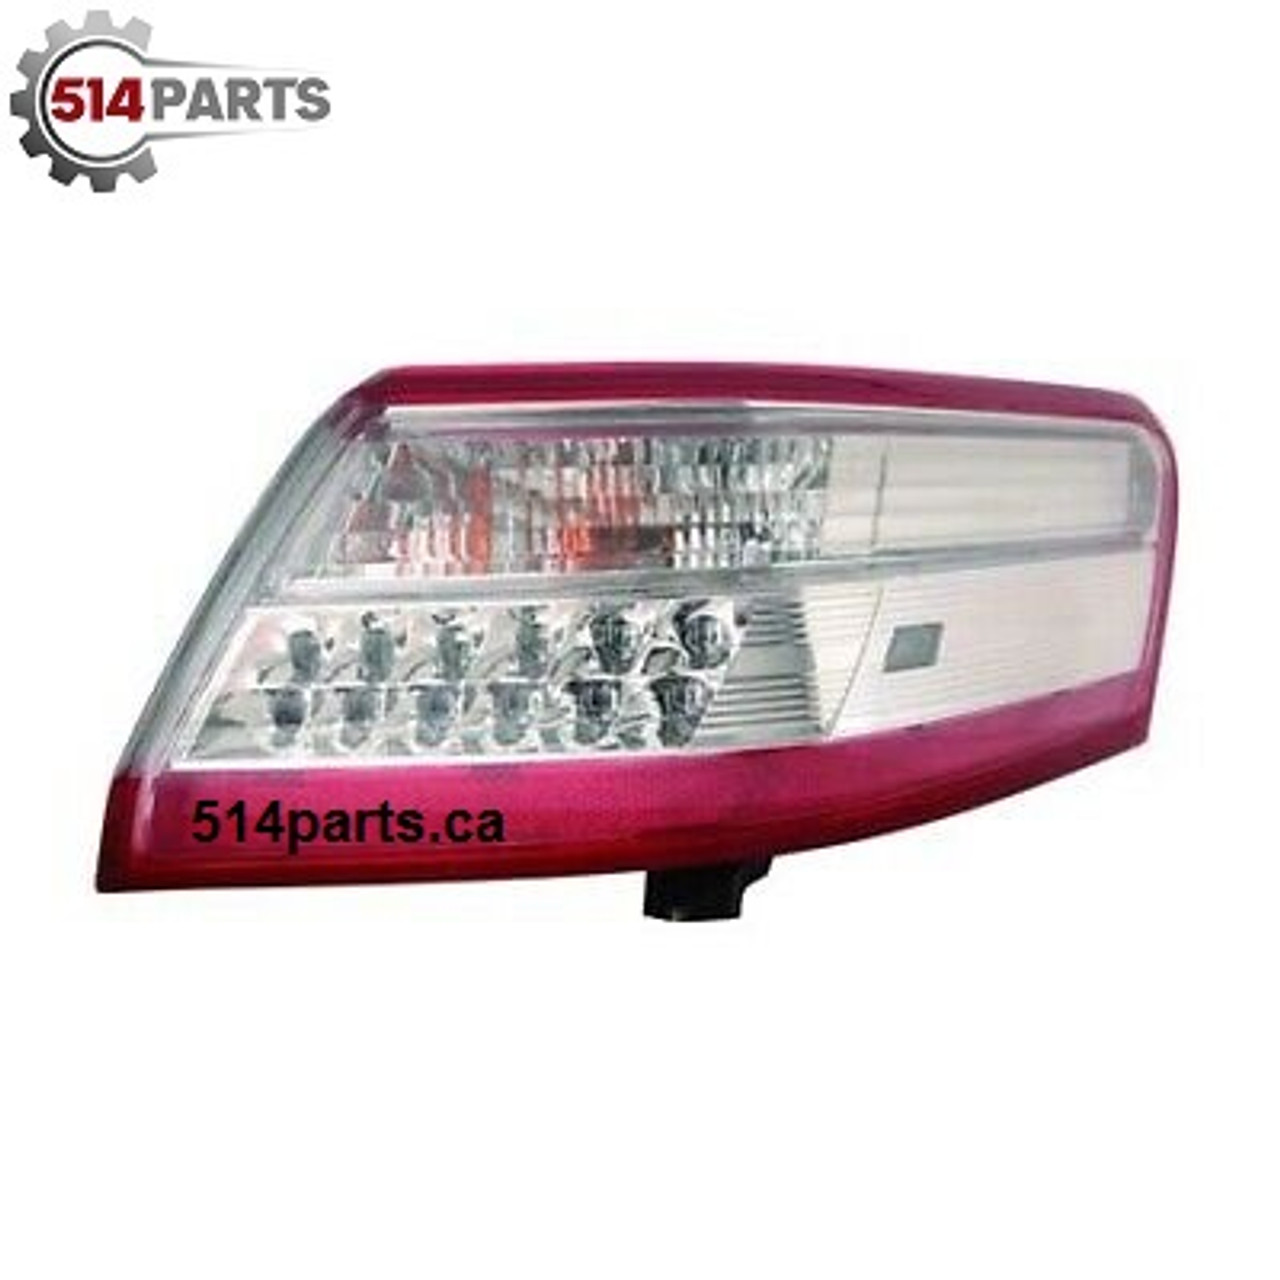 2010 - 2011 TOYOTA CAMRY HYBRID USA BUILT TAIL LIGHTS High Quality - PHARES ARRIERE Haute Qualite